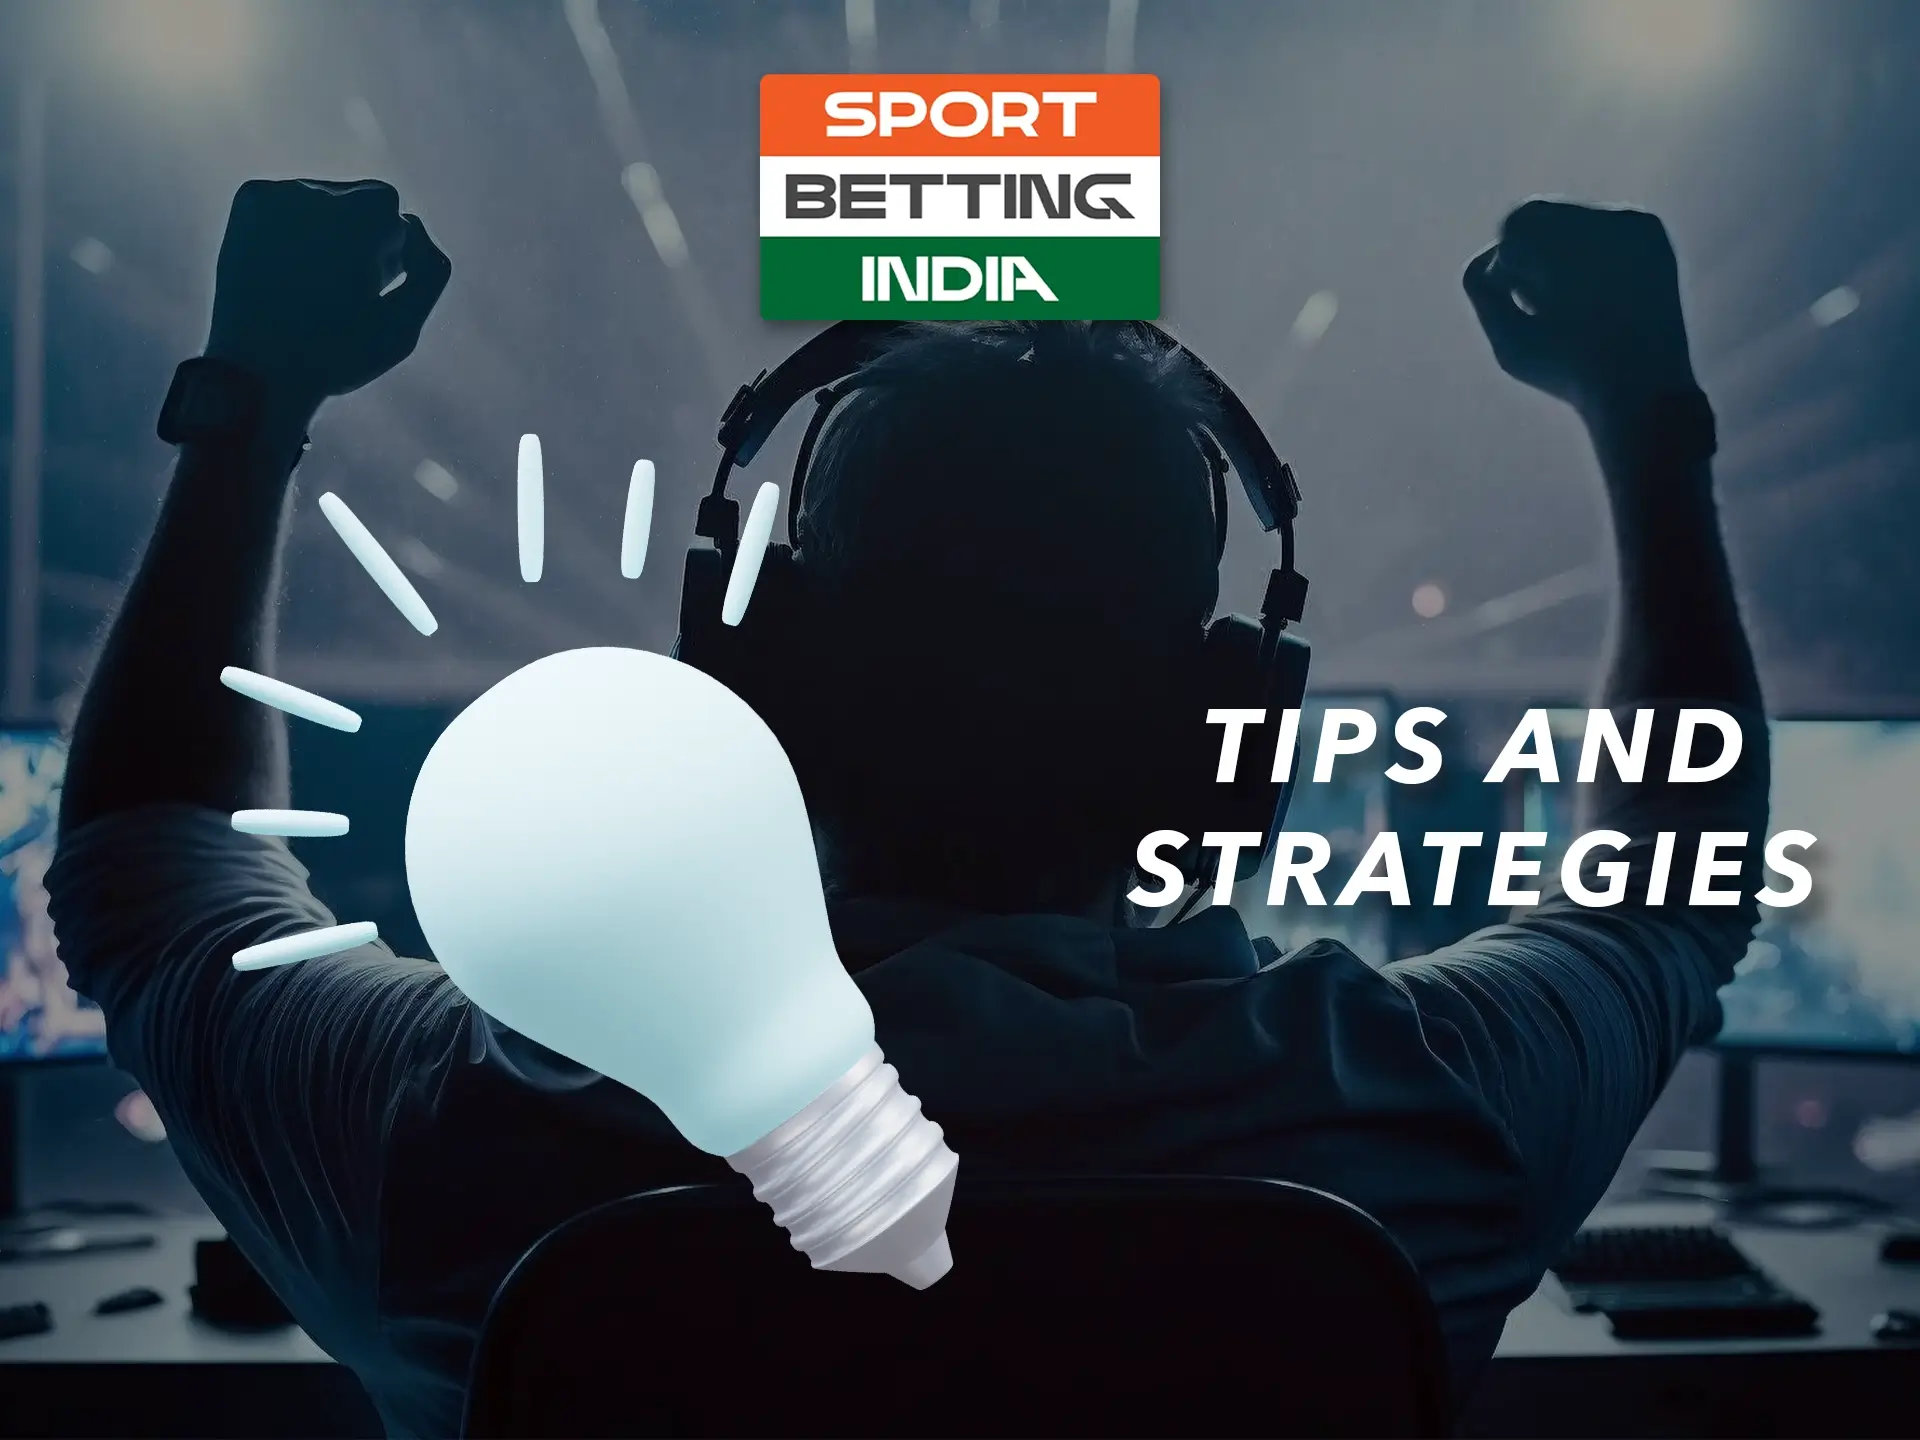 Apply your skills and abilities when analysing and betting on cyber sports.